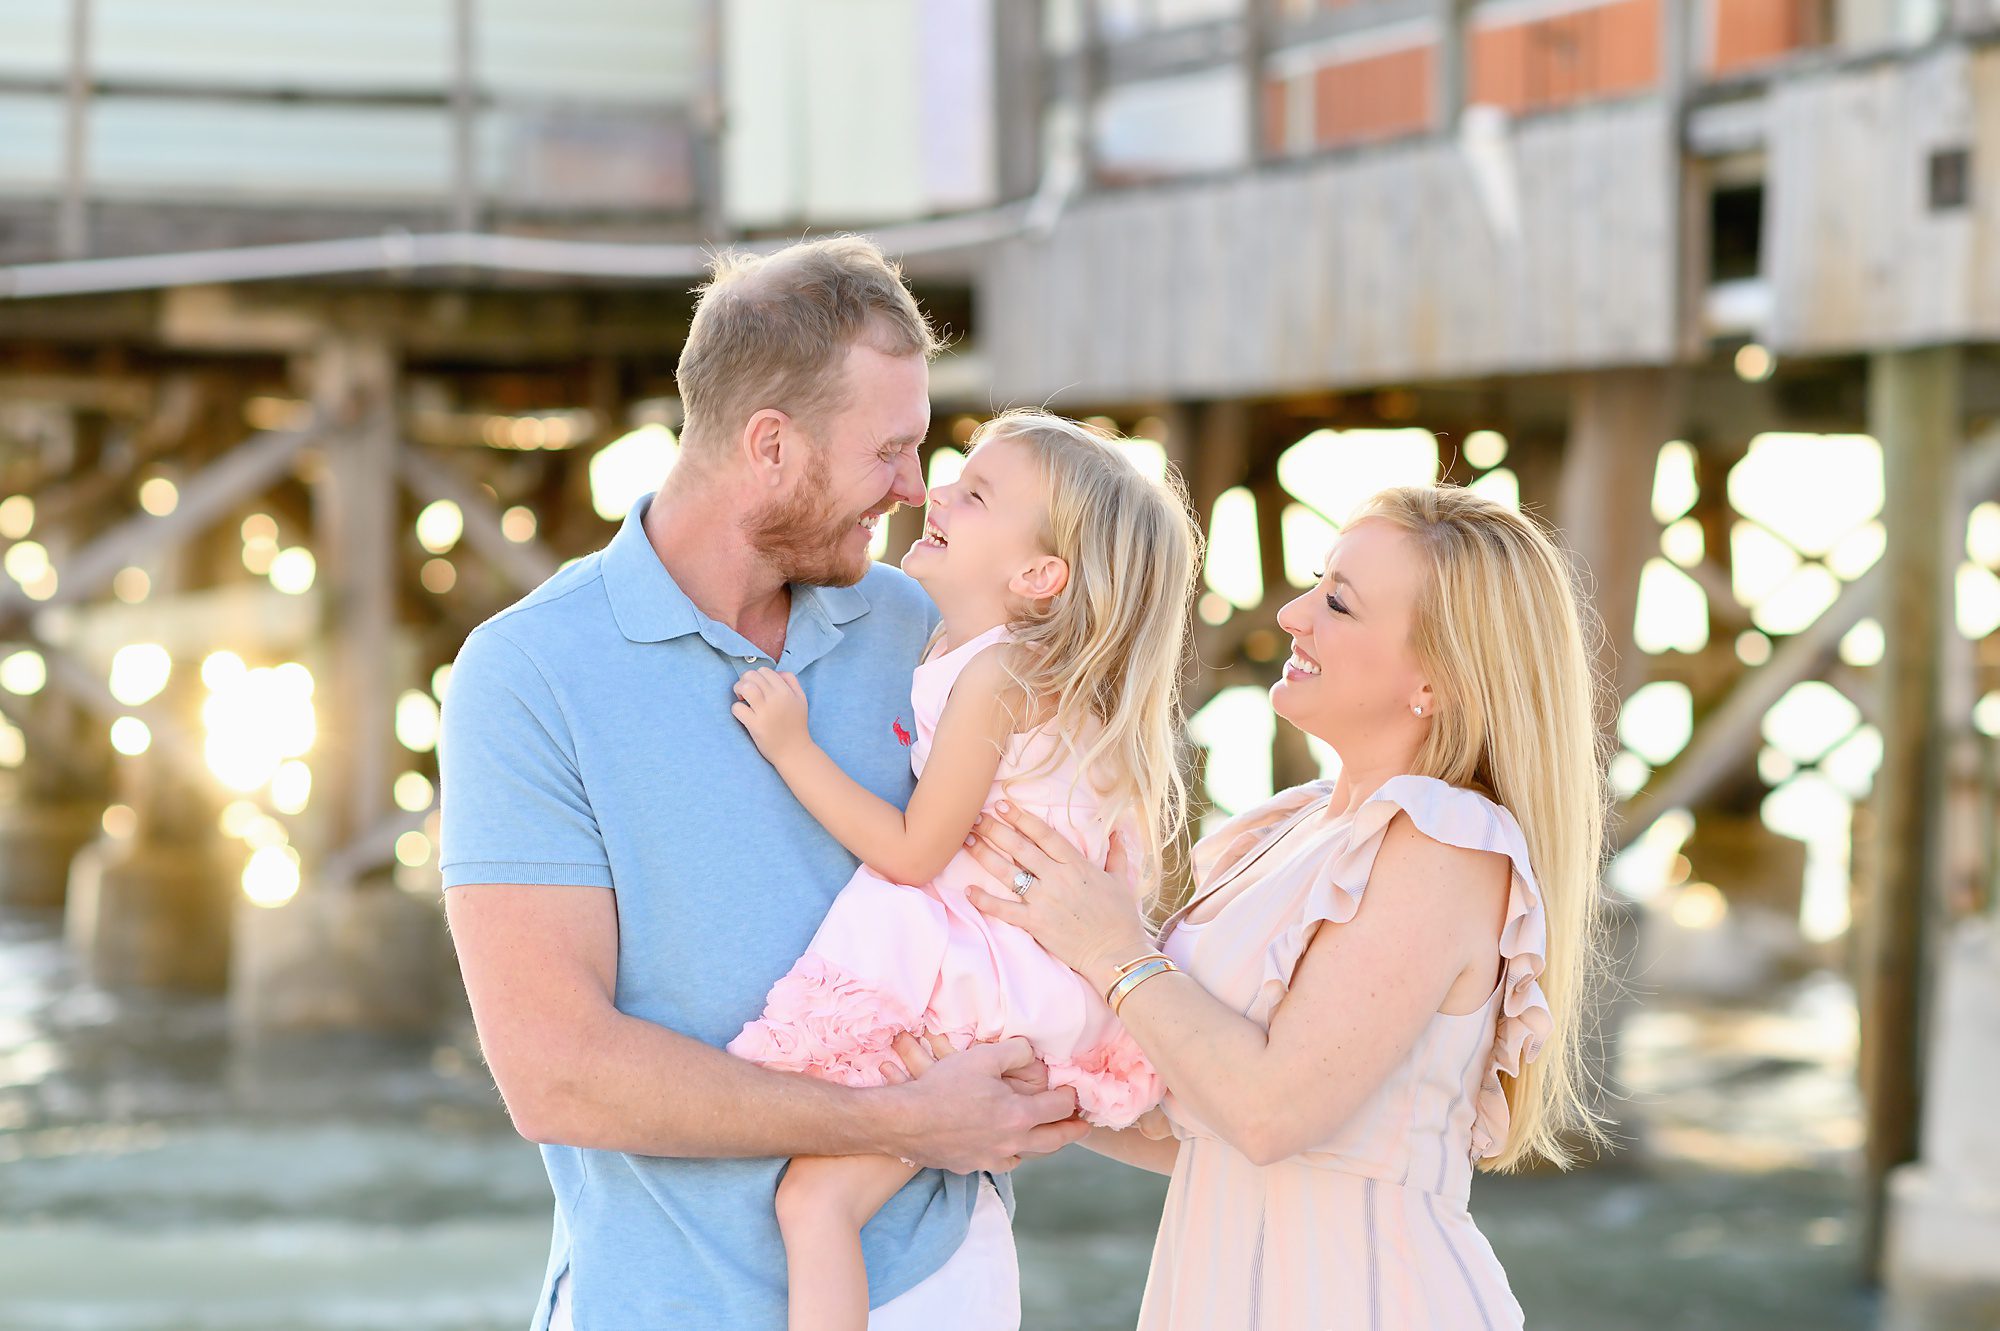 A mom and dad take family beach portraits with their young blonde haired daughter at sunset in front of Redington Pier in Redington Shores, Florida. 